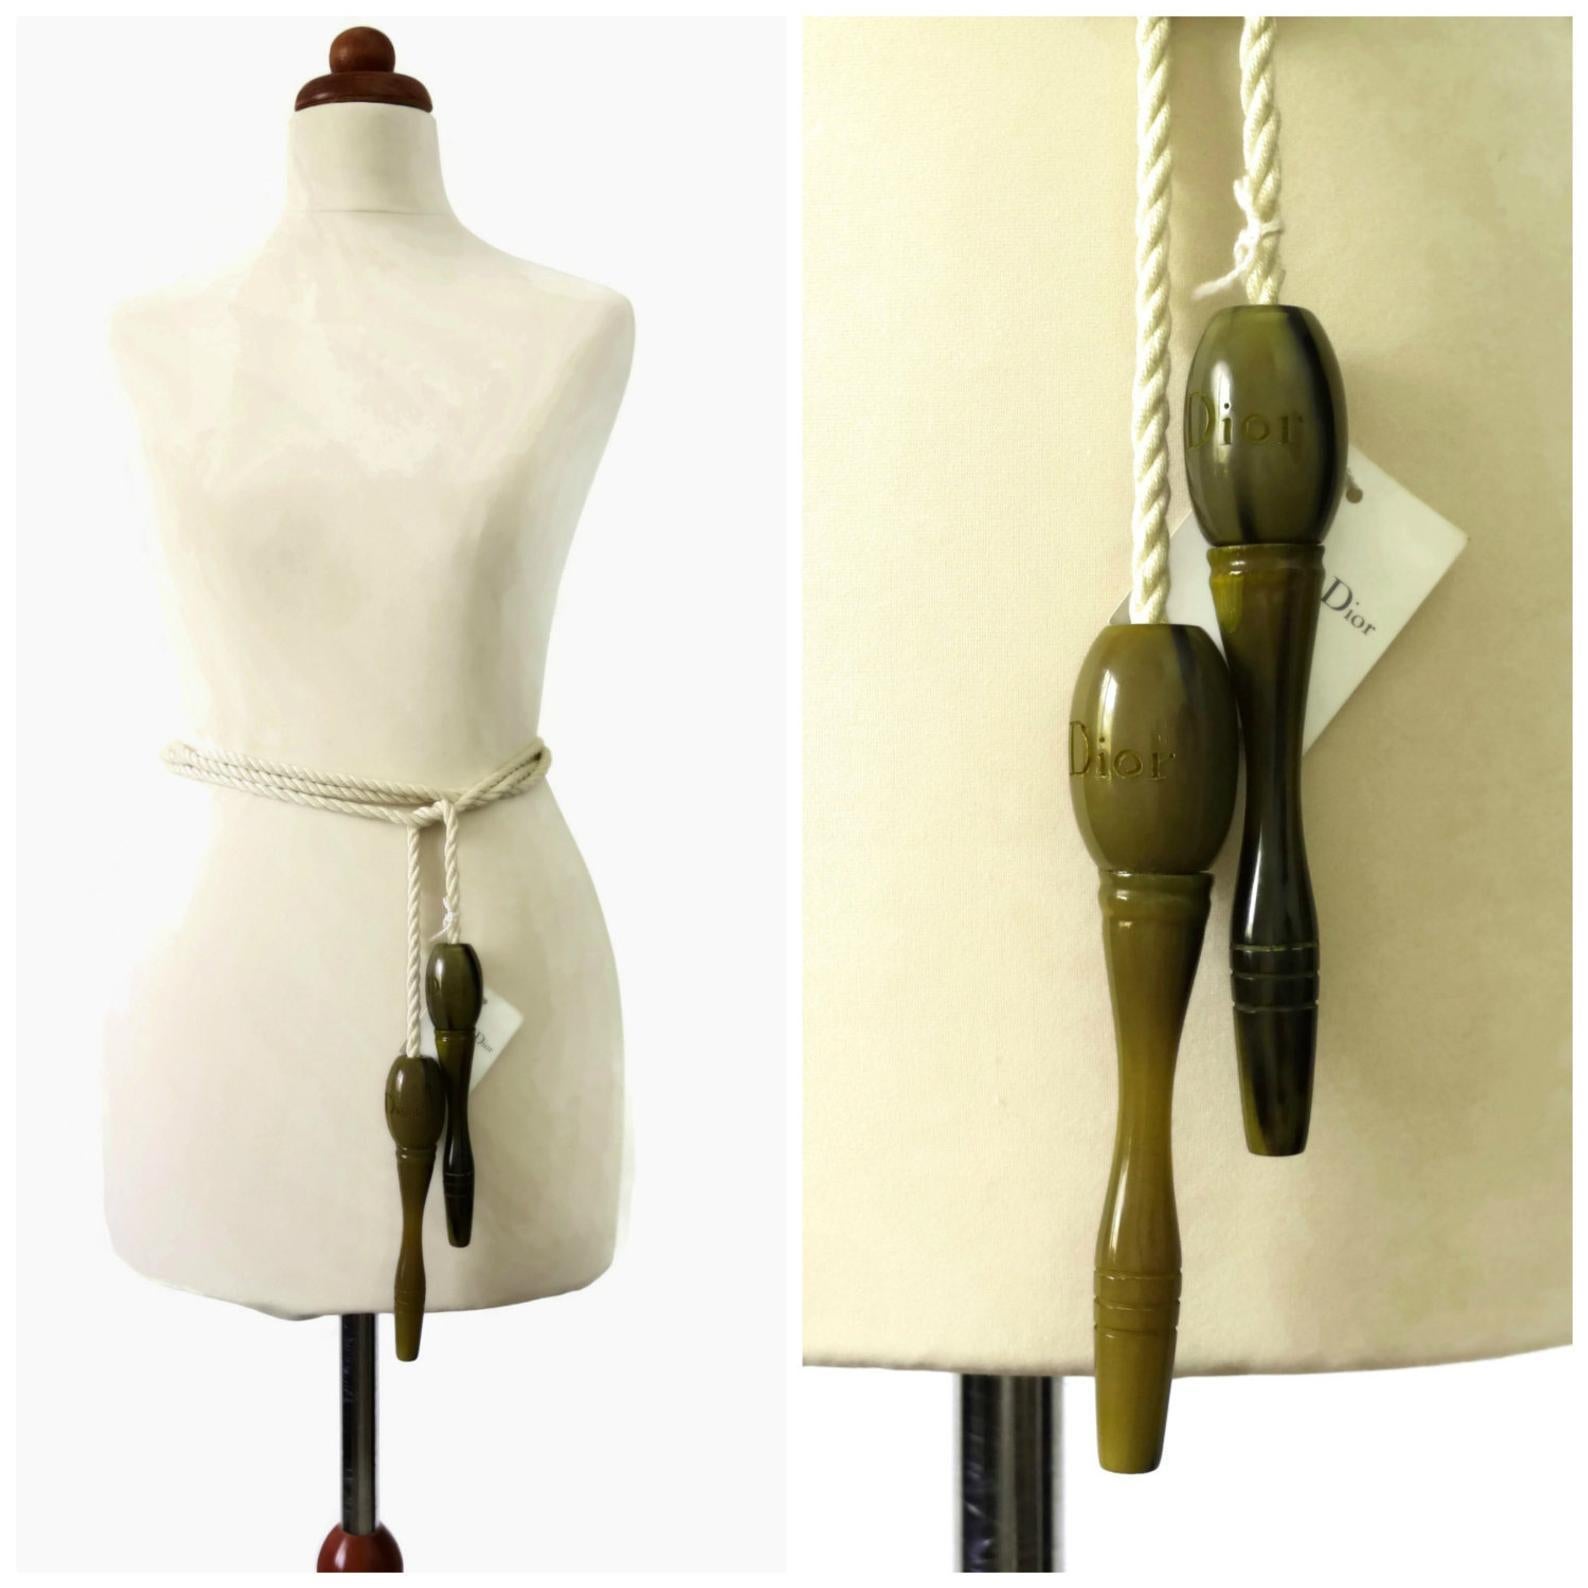 Vintage Rare CHRISTIAN DIOR Resin Jumping Rope Belt

Measurements:
Handle Height: 6 2/8 inches
Handle Width: 1 2/8 inches
Length: 102 2/8 inches

Features:
- 100% Authentic CHRISTIAN DIOR.
- Marbled olive green handles with engraved DIOR on each.
-